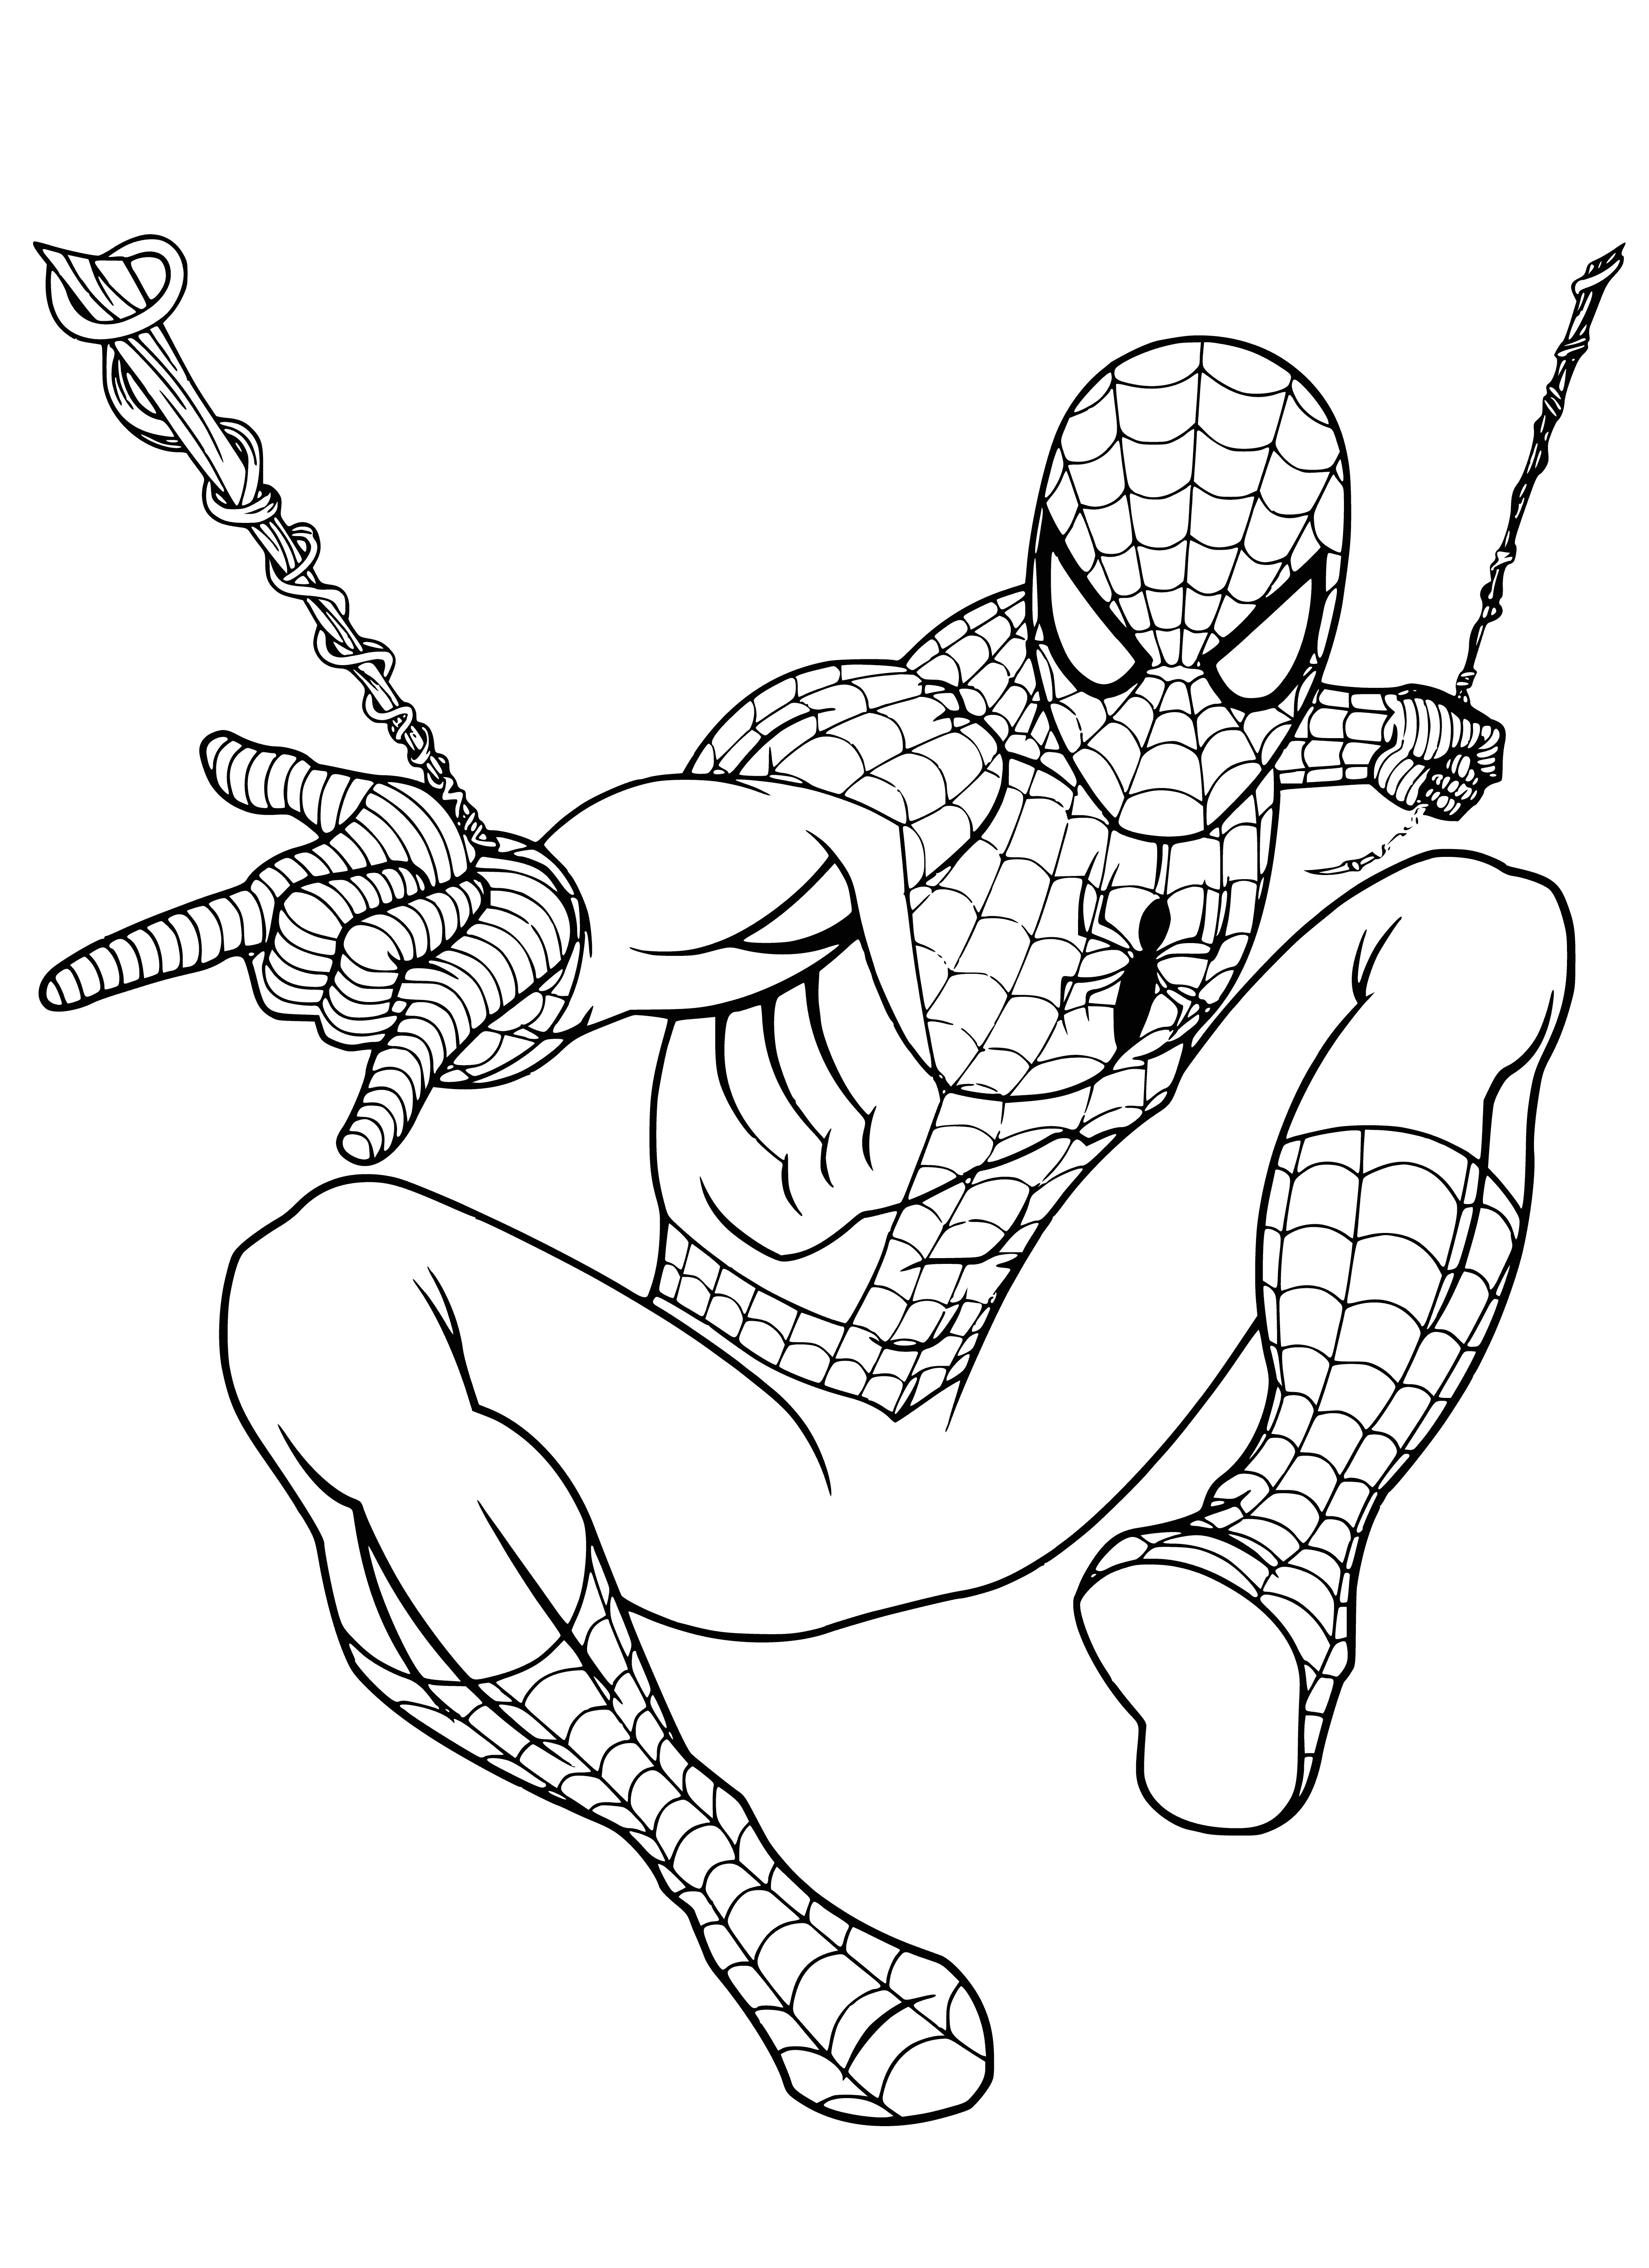 coloring page: Cartoon character in red/blue costume w/ "S" on front, red mask, black gloves & boots, in Spiderman-like pose. #coloringpage